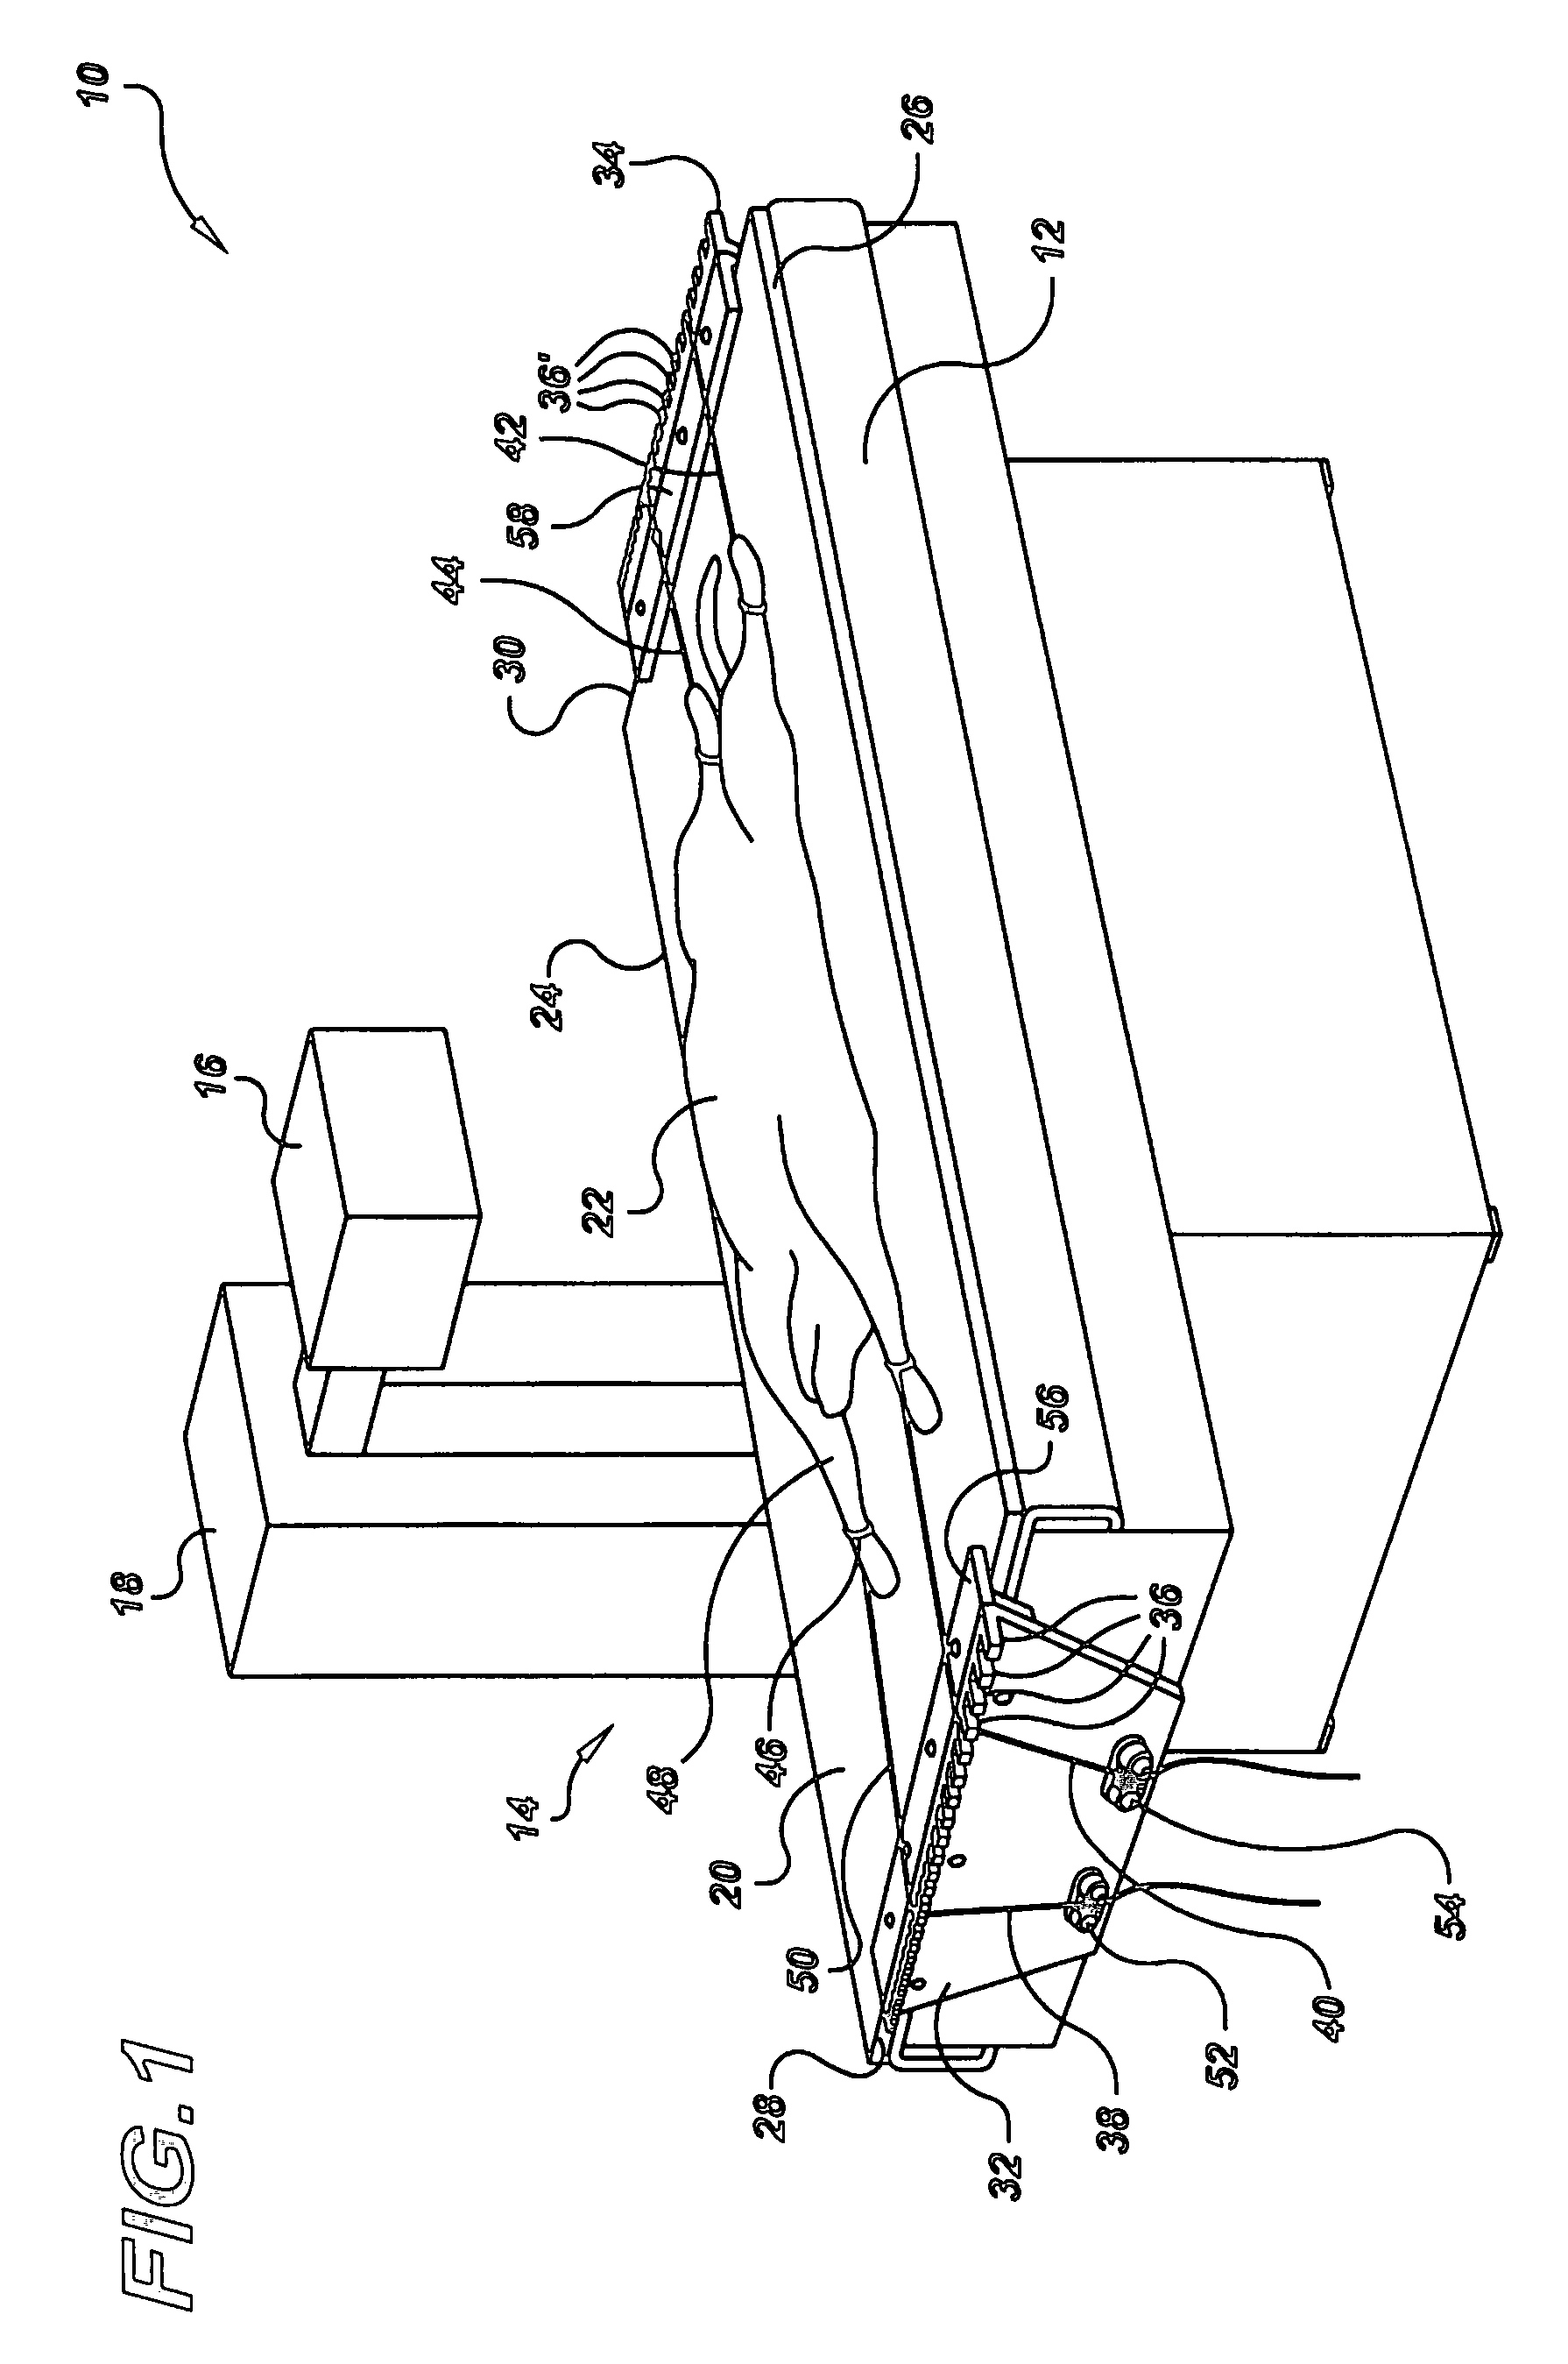 System for rapidly positioning a small animal on a veterinary table